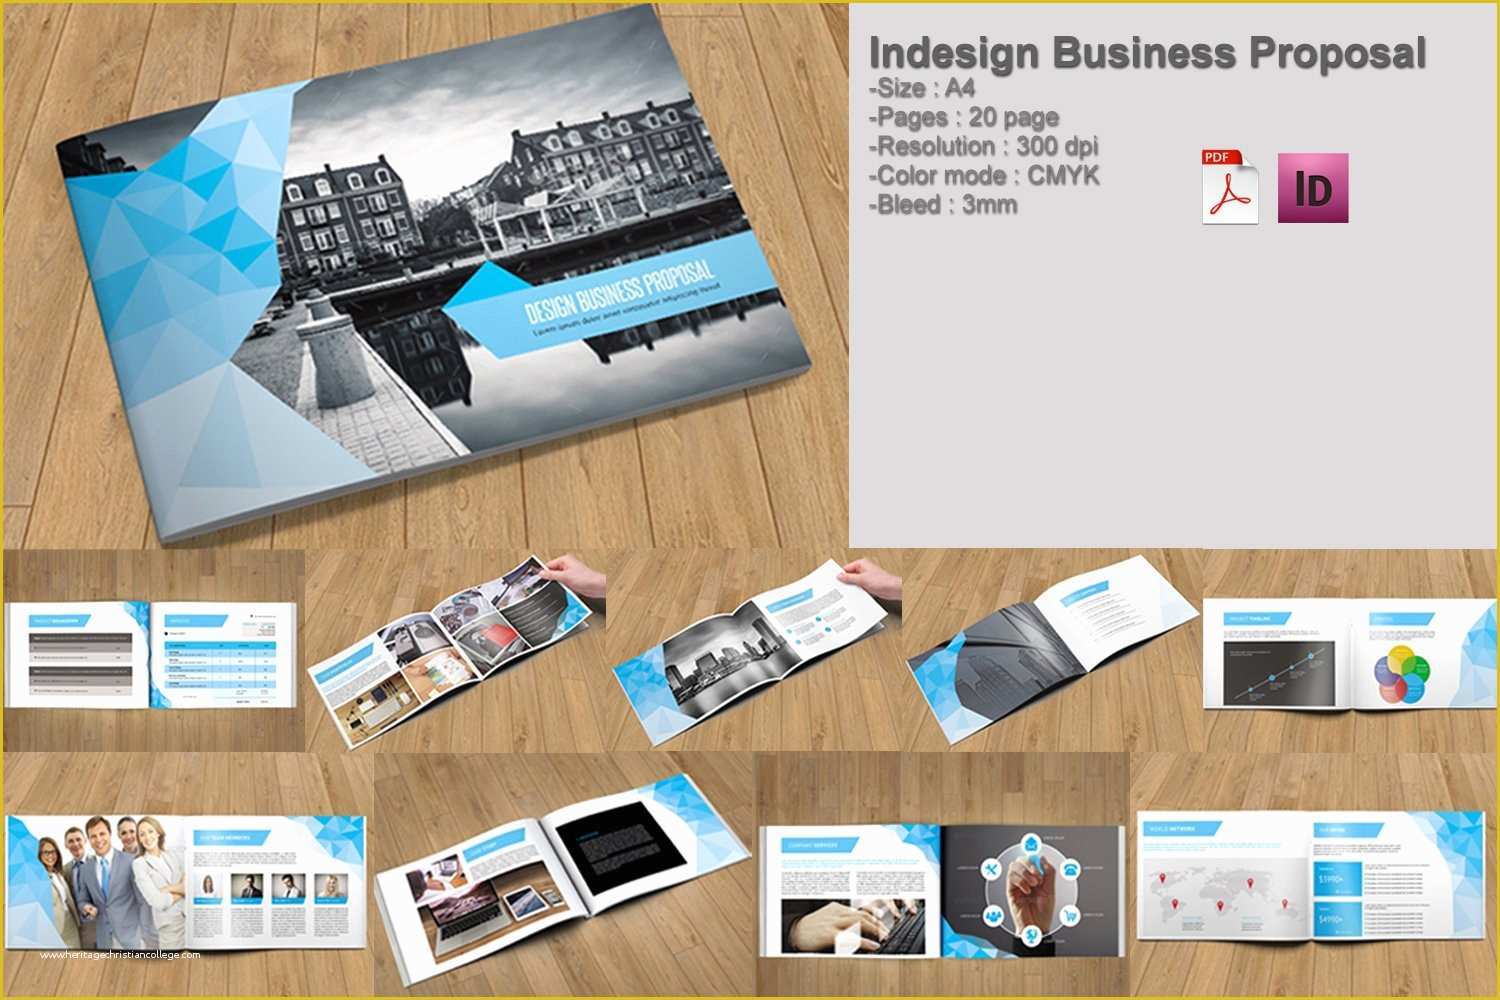 Indesign Business Proposal Templates Free Of Indesign Business Proposal V213 Brochure Templates